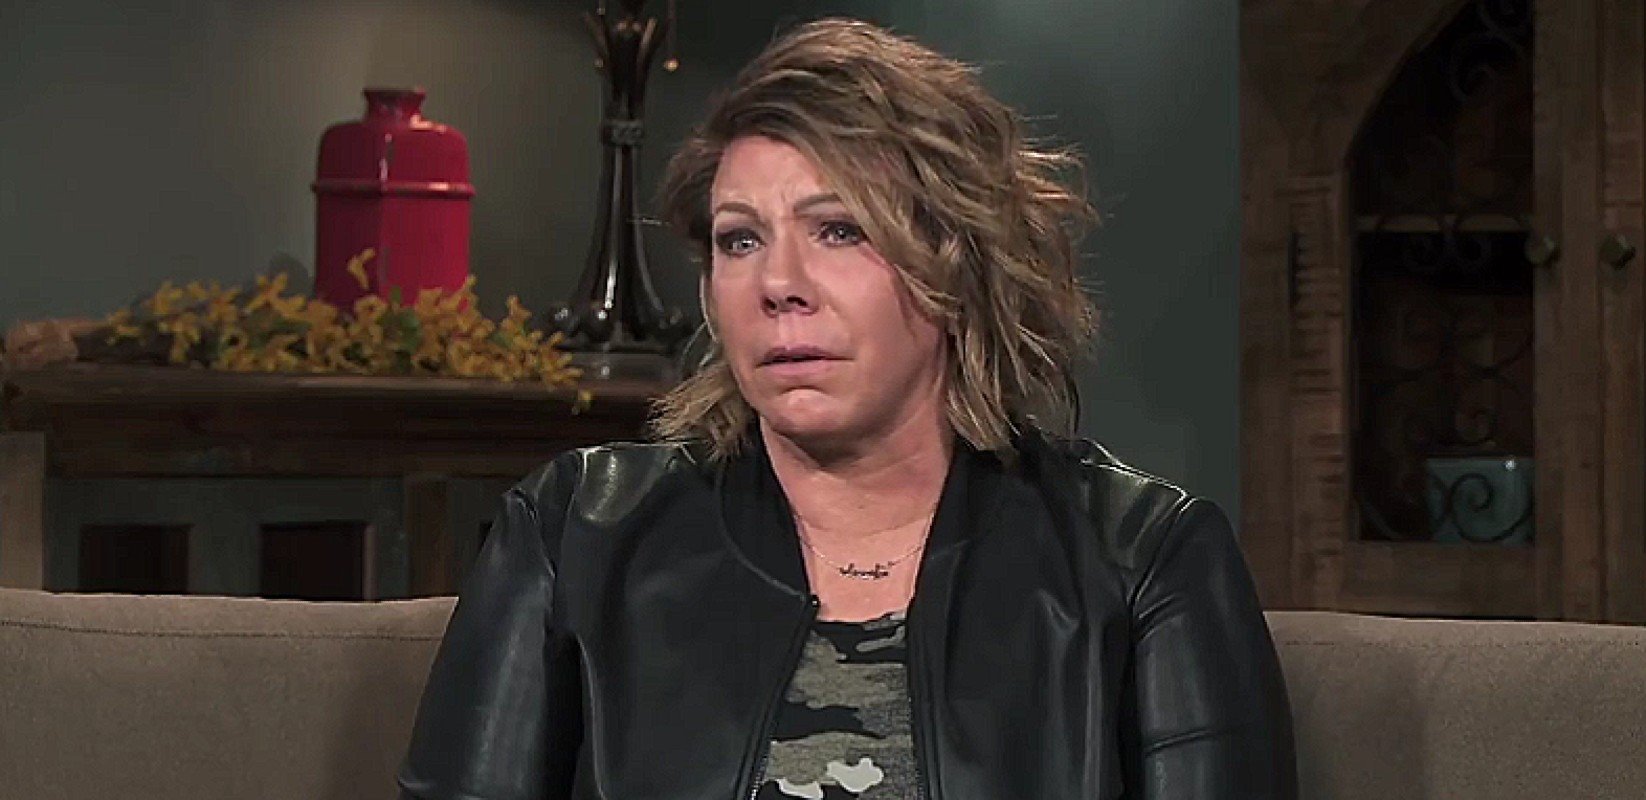 Meri Brown cries during a confessional for Season 17 of TLC's Sister Wives.